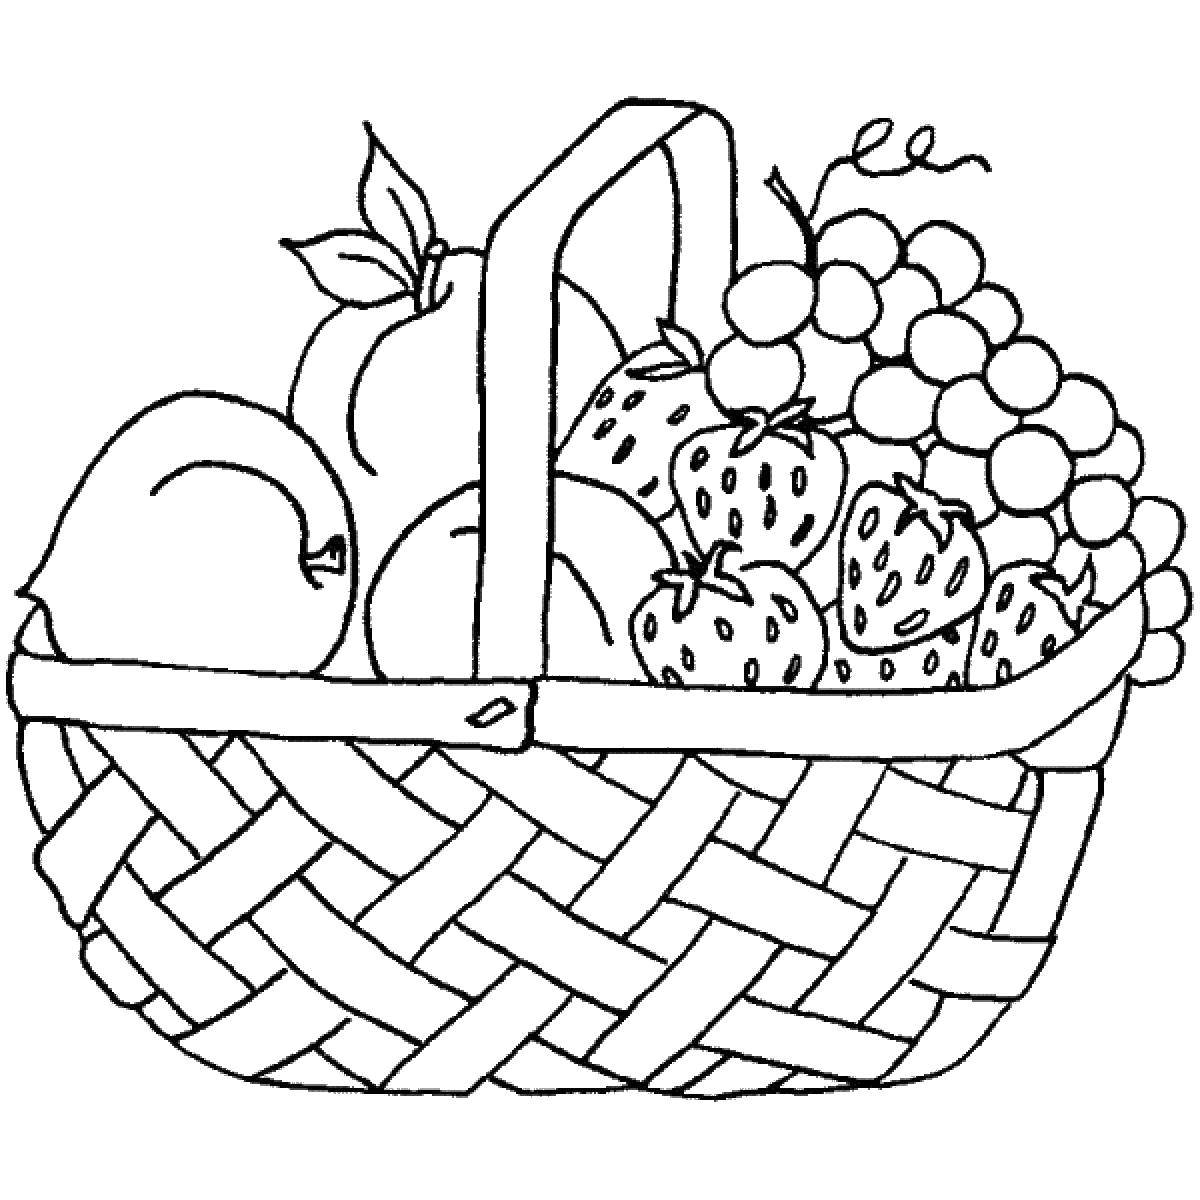 Premium Vector | Fruit basket coloring page for kids vector illustration  eps and image